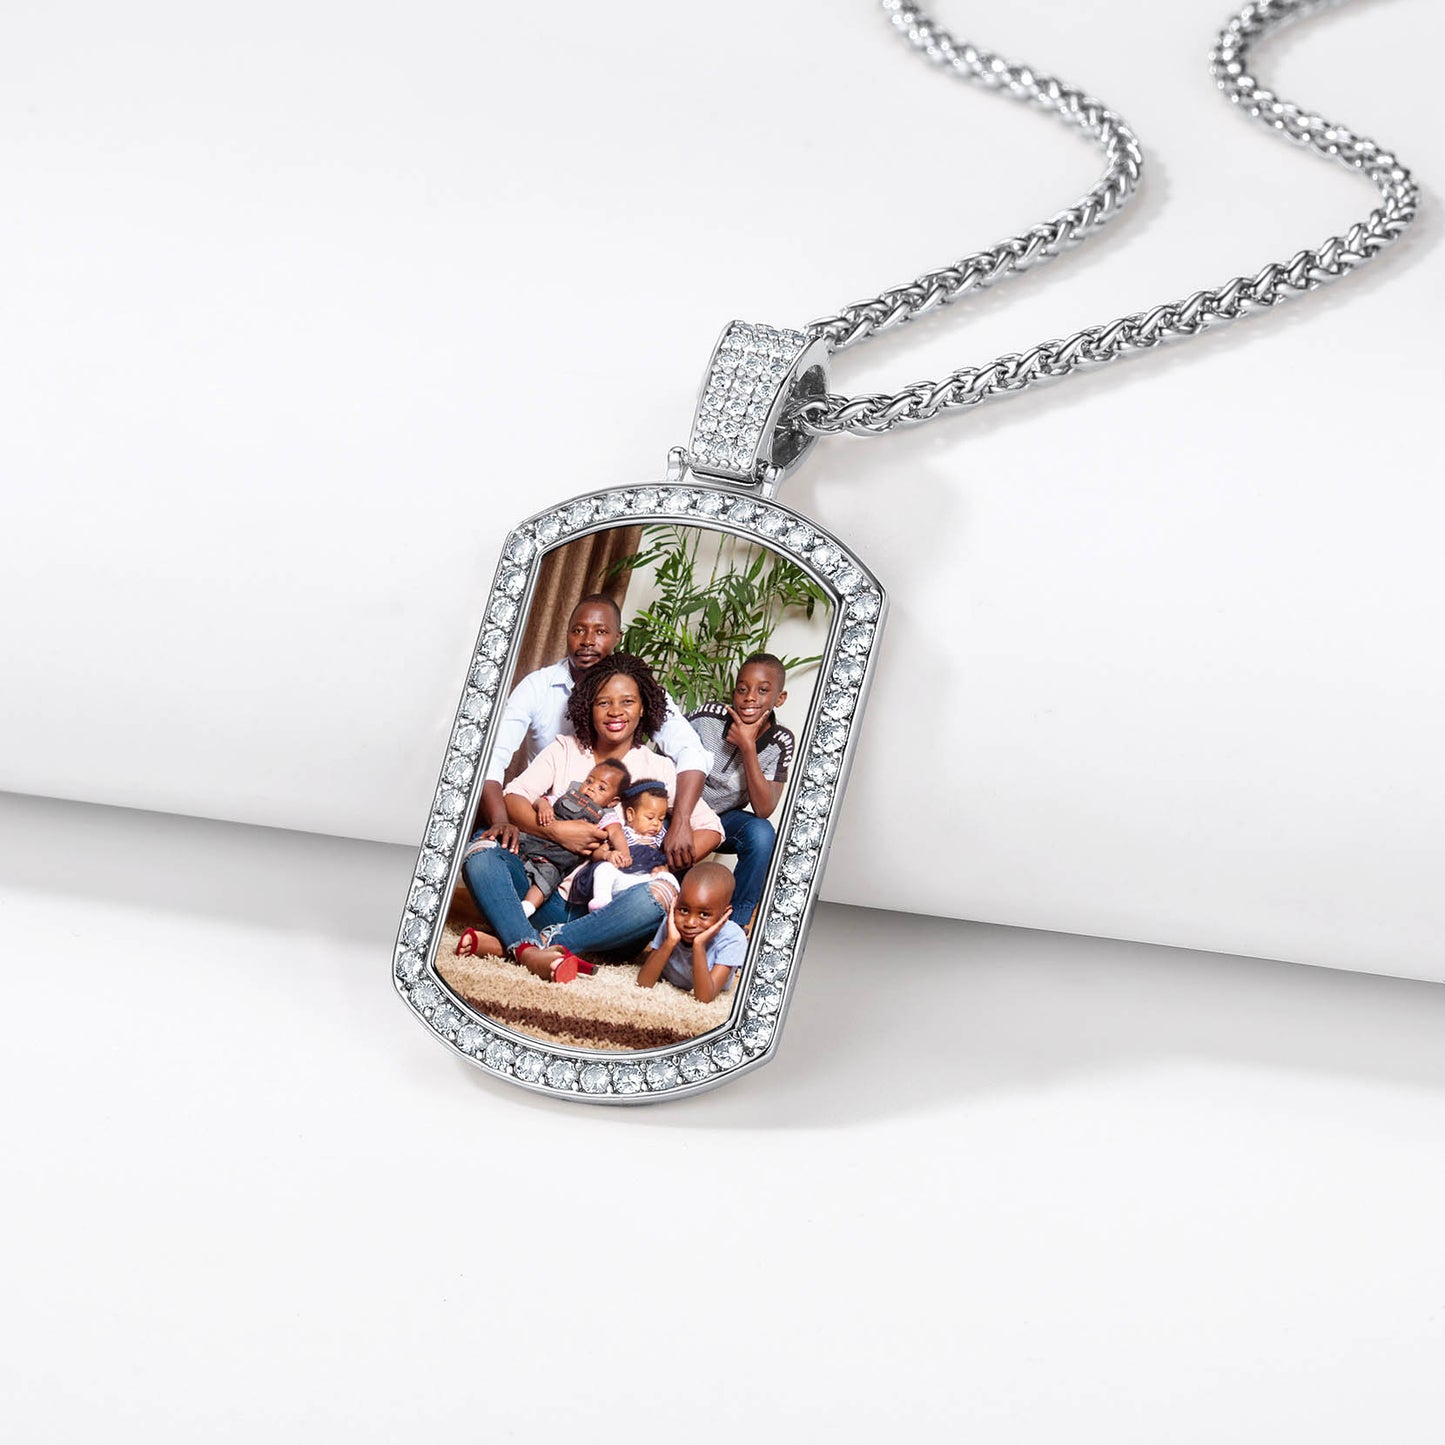 Personalized Dog Tag Pictures Necklace for Men Women